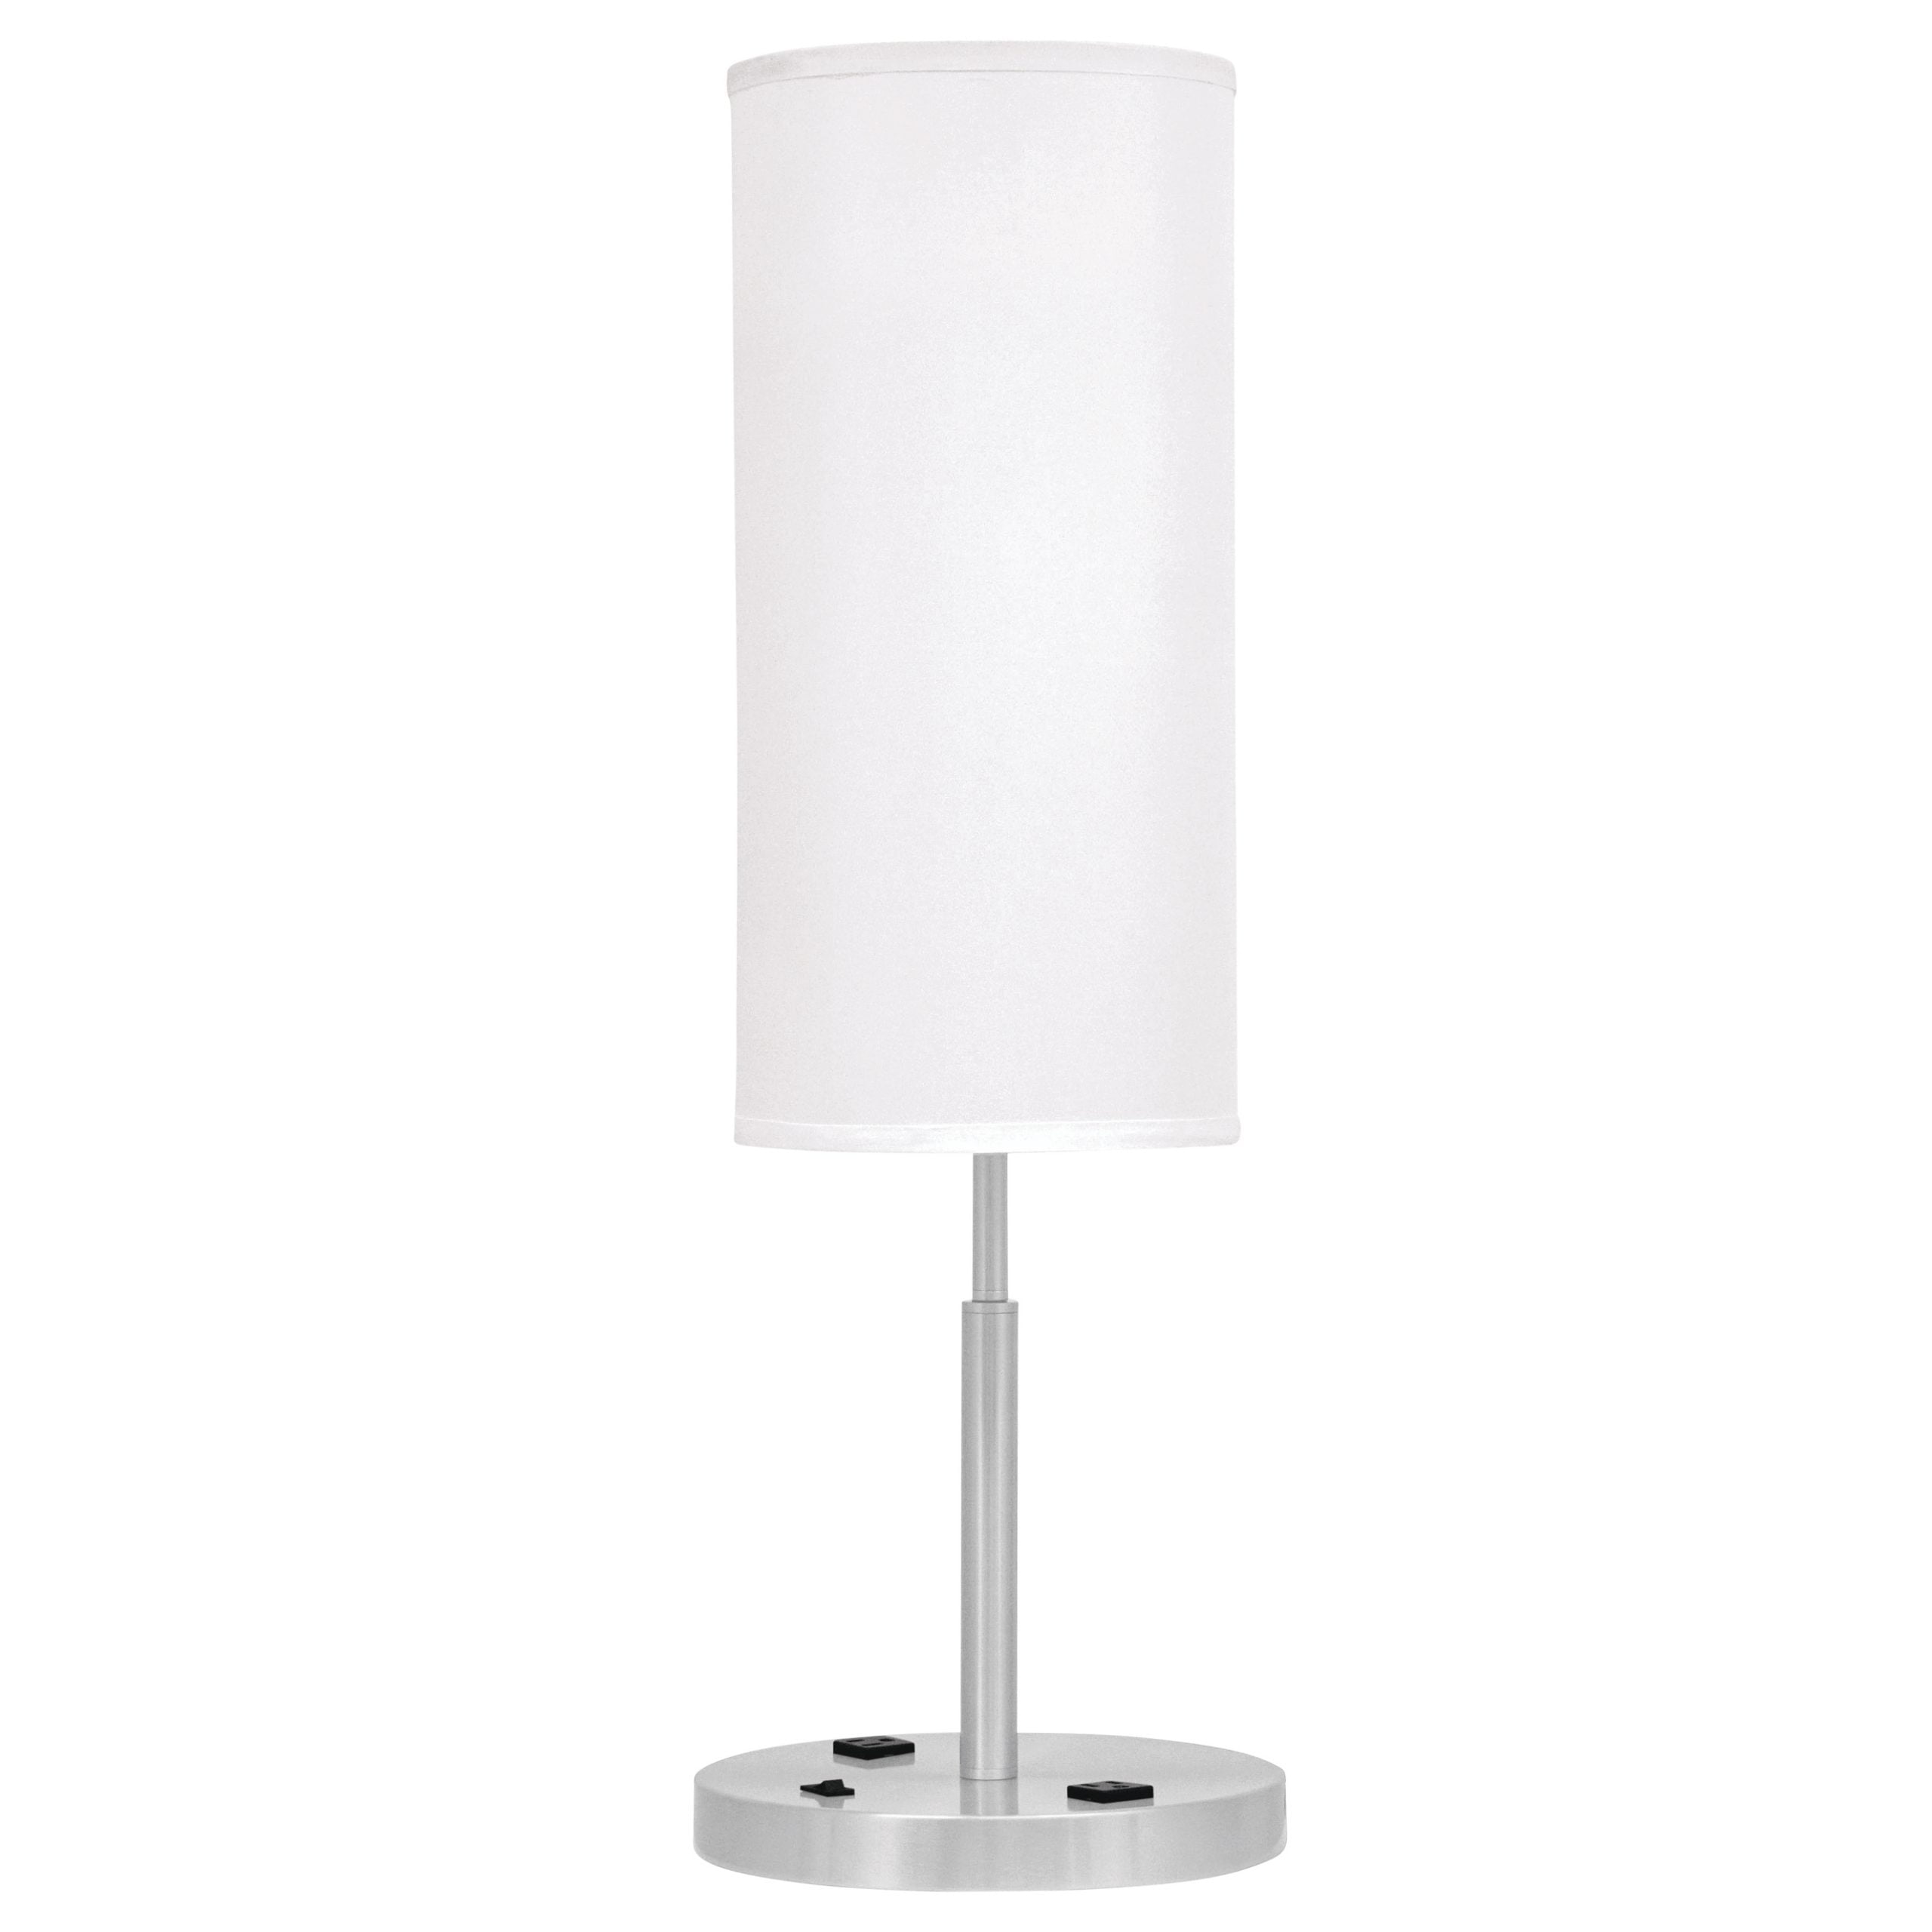 Mainstay End Table Lamp with Rocker Switch